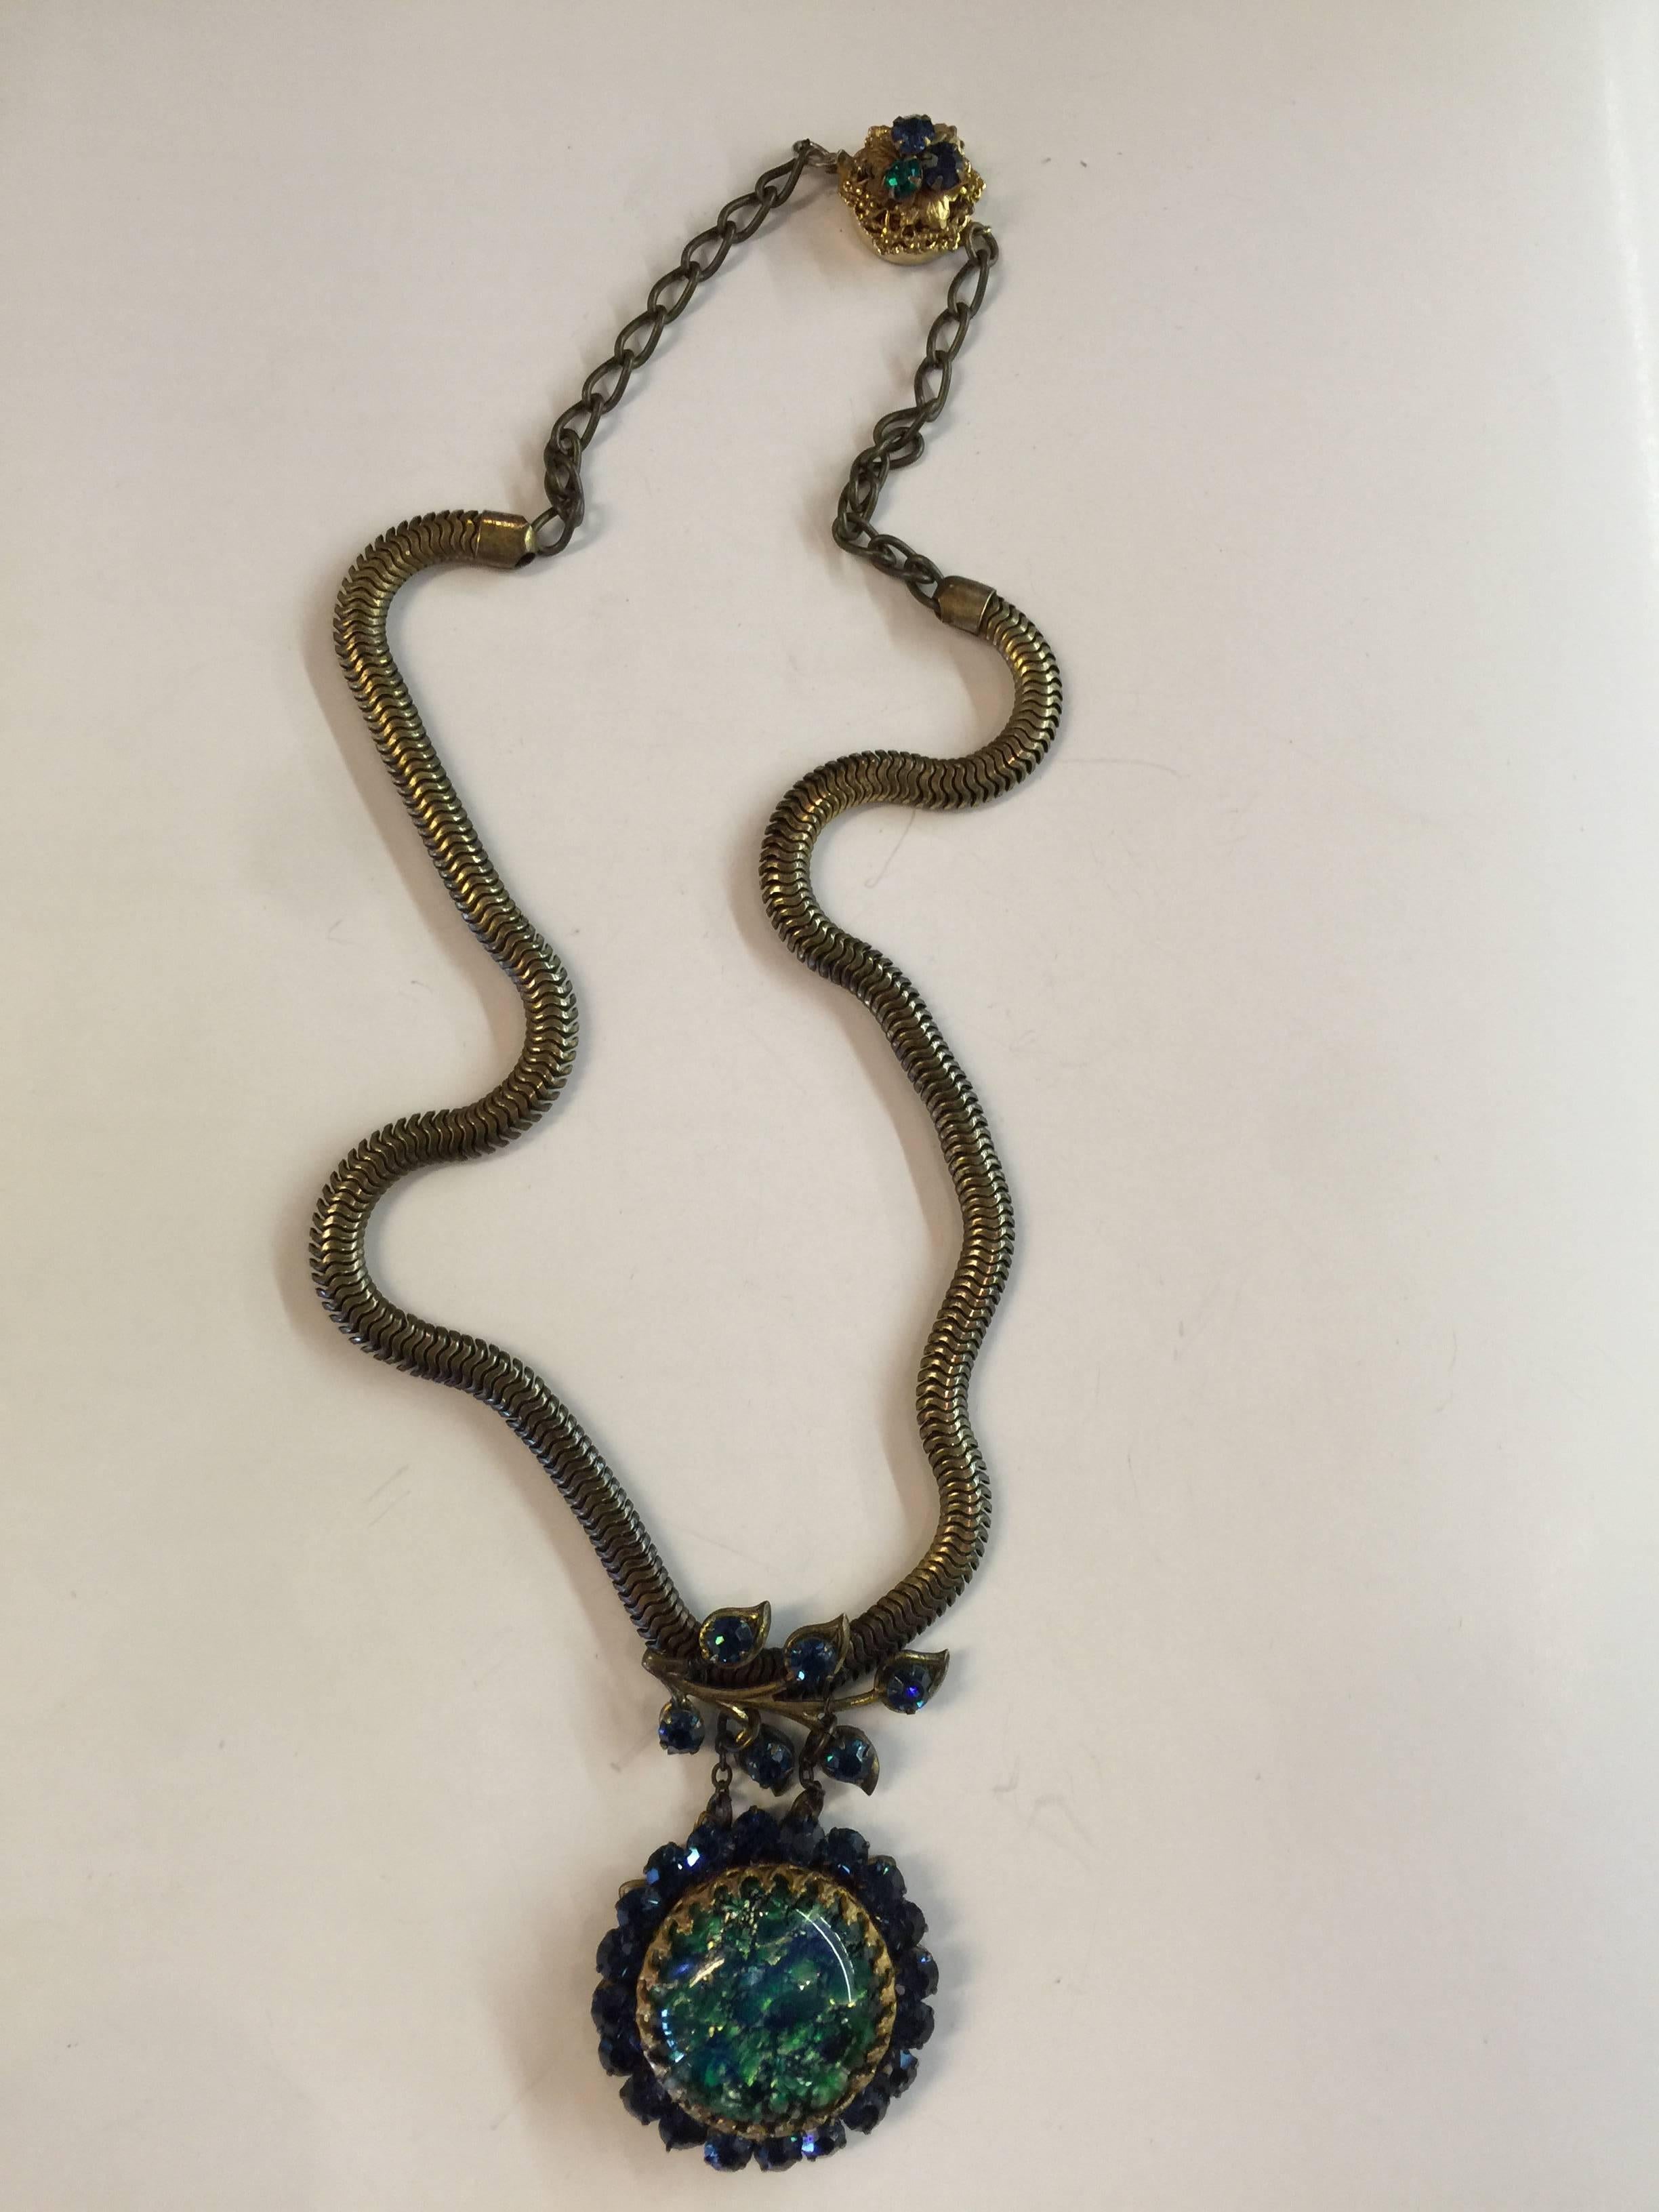 This unusual 1950s MIRIAM HASKELL Slinky Chain Necklace with blue stone and blue rhinestone rhinestone drop is not typical of the storied company's usual work style. Antiqued gold flat chain is super-tailored in appearance, and the lovely domed